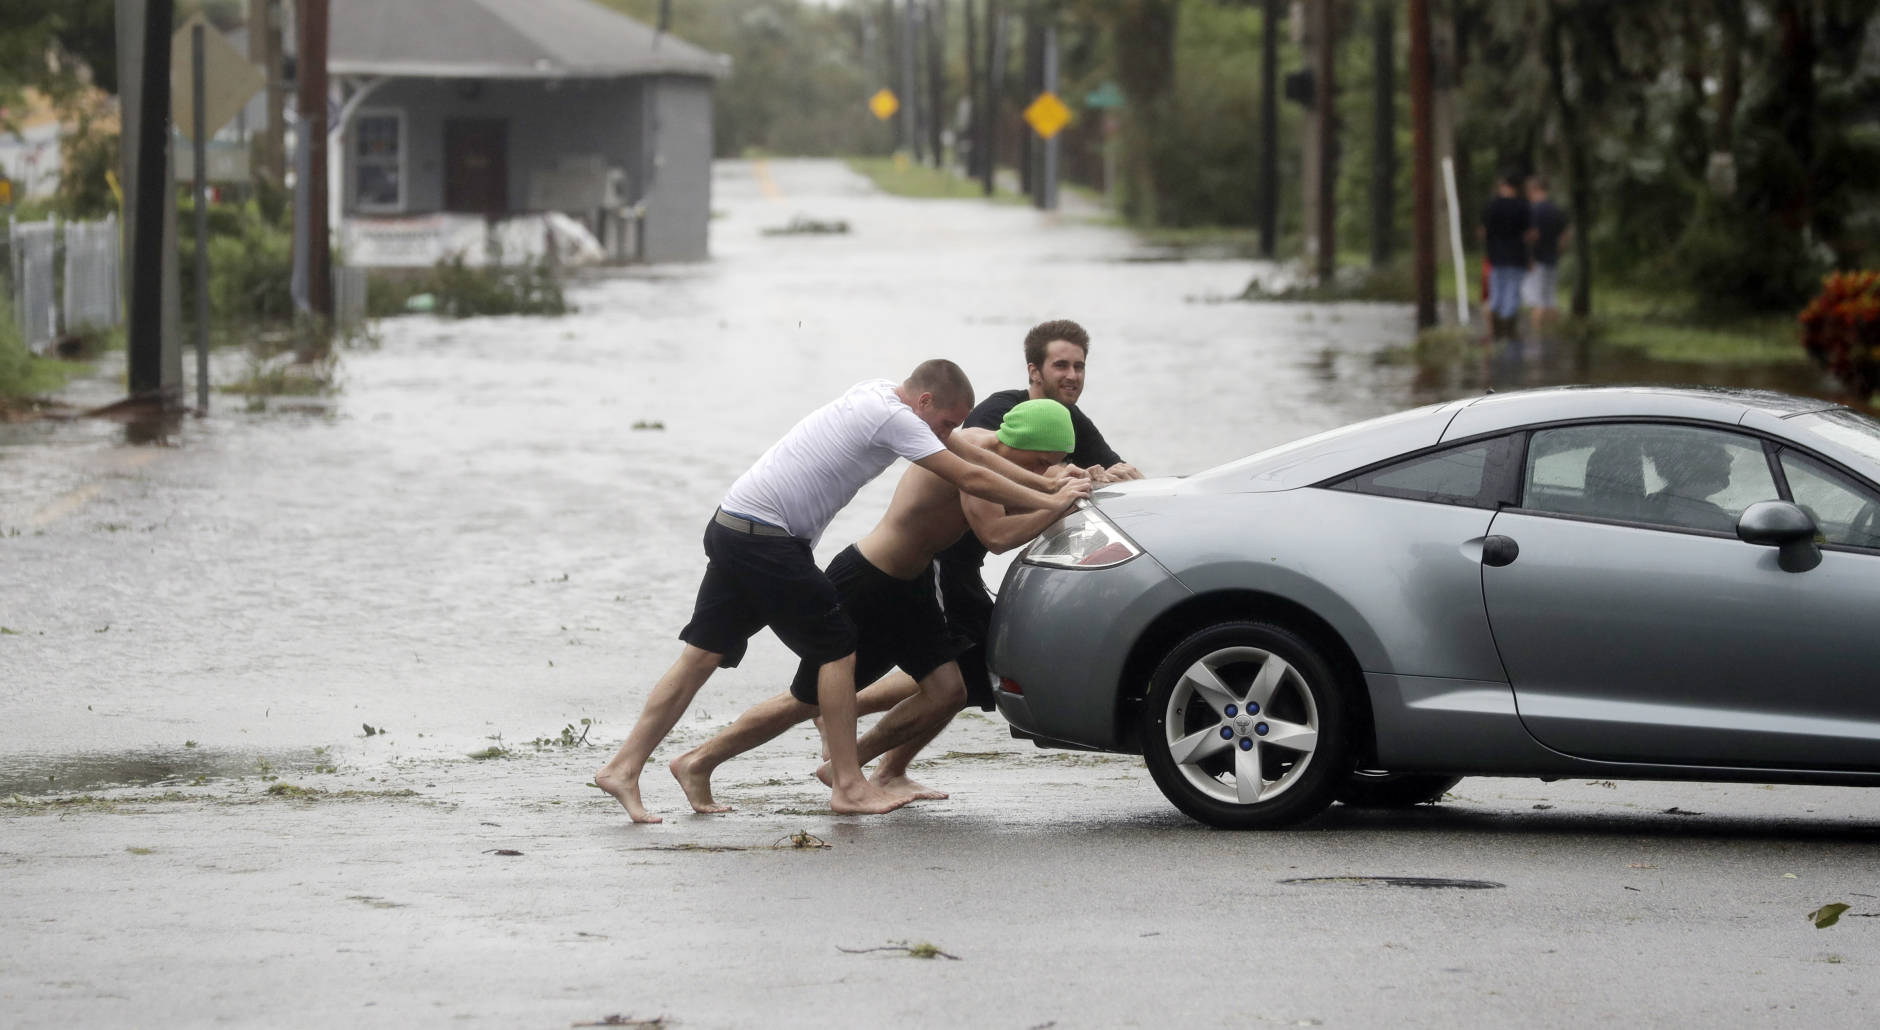 Noah Simons steers as his car is pushed out of flood waters caused by Hurricane Matthew, Friday, Oct. 7, 2016, in Daytona Beach, Fla. Hurricane Matthew spared Florida’s most heavily populated stretch from a catastrophic blow Friday but threatened some of the South’s most historic and picturesque cities with ruinous flooding and wind damage as it pushed its way up the coastline.  (AP Photo/Eric Gay)